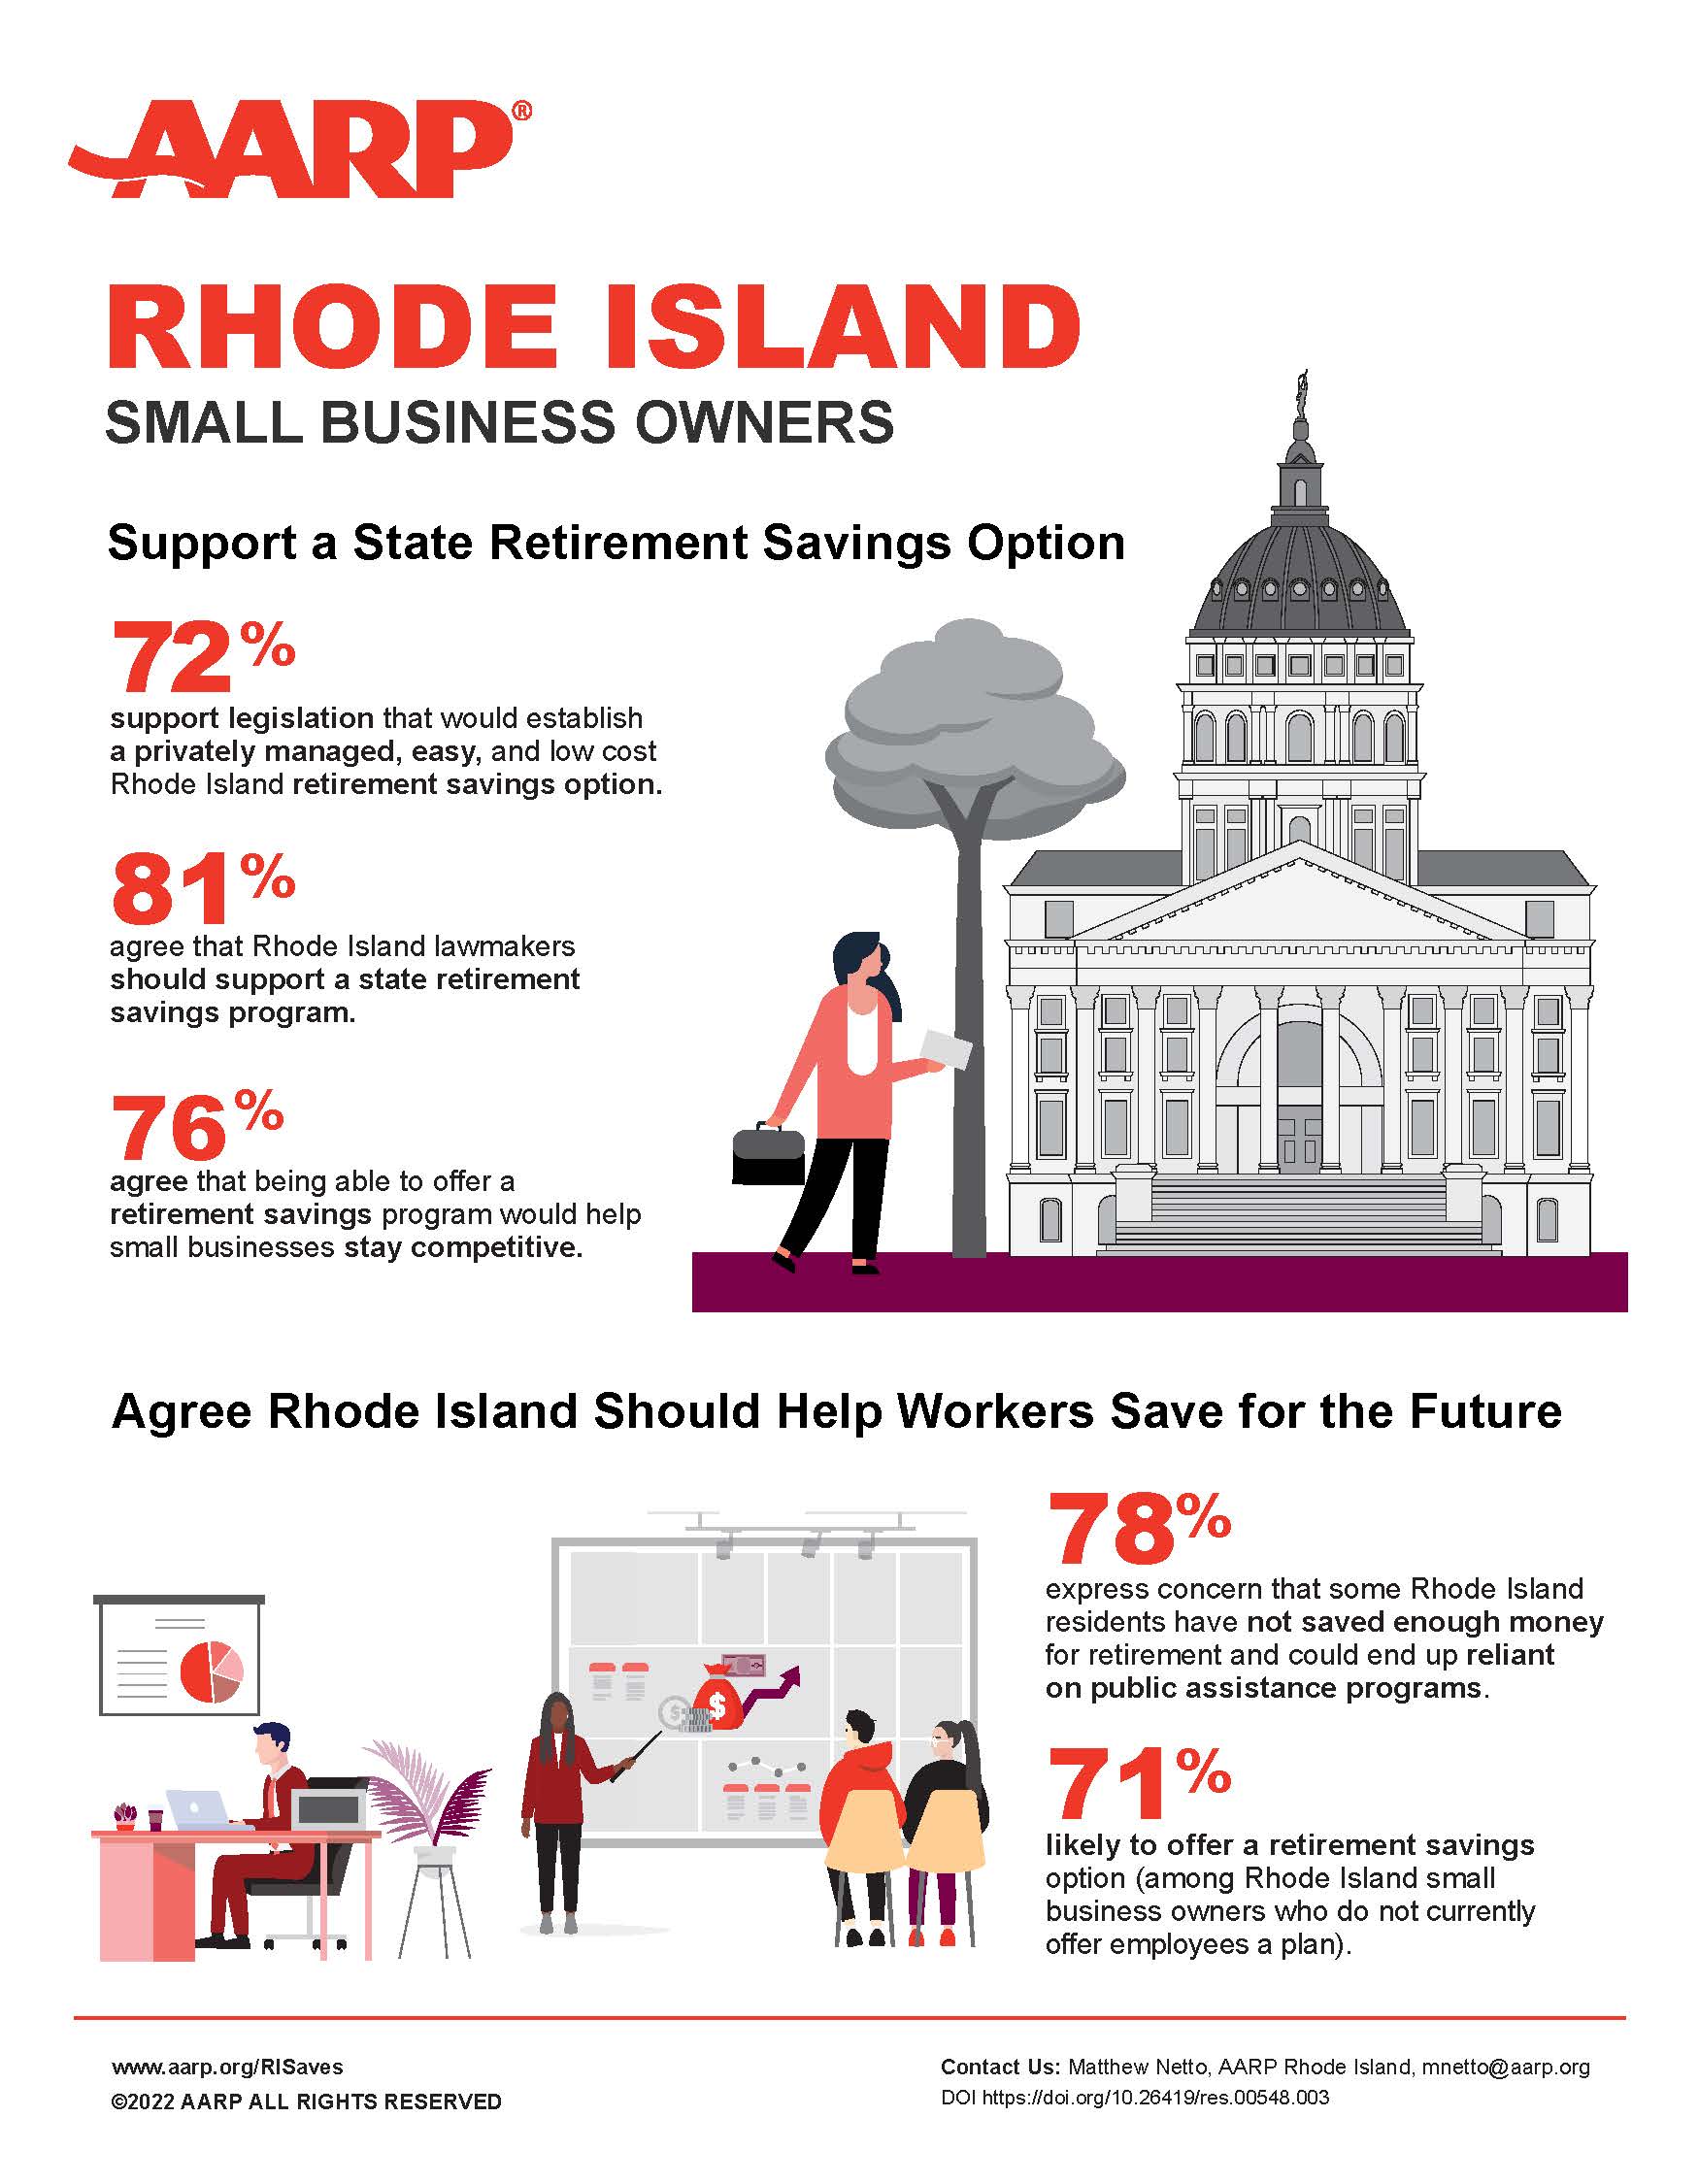 rhode-island-retirement-savings-small-business-owners-infographic.doi.10.26419-2Fres.00548.003.jpg